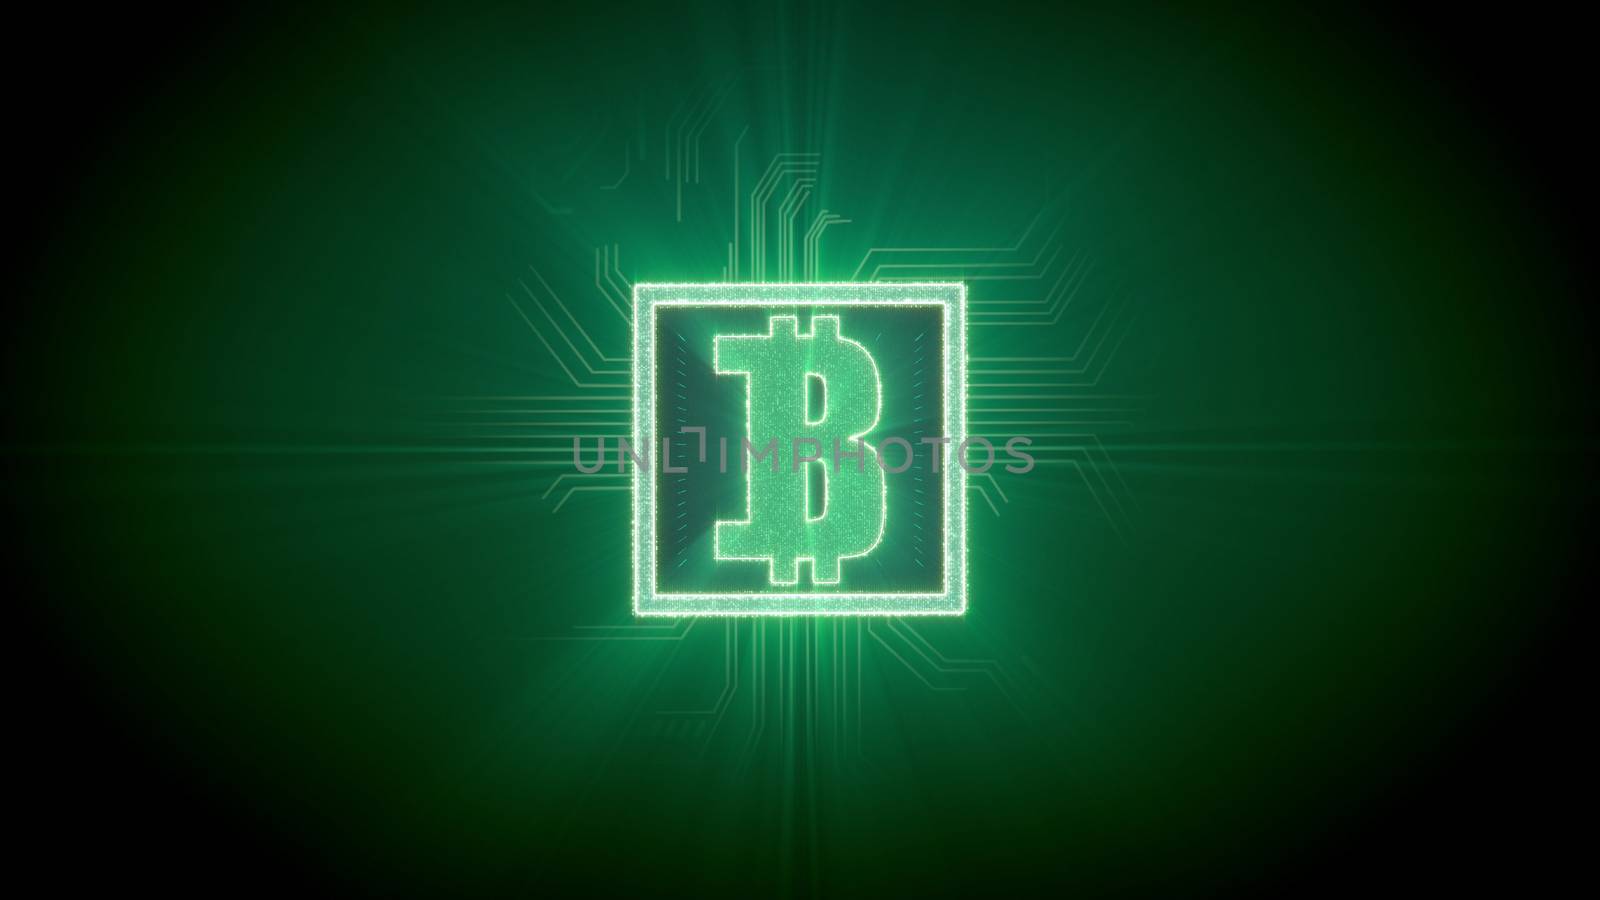 Imperial 3d illustration of a bitcoin shaped CPU in a bright square cross looking tubes around, sparkling lines in a cyberspace, in the dark green background. It looks dazzling and grand.